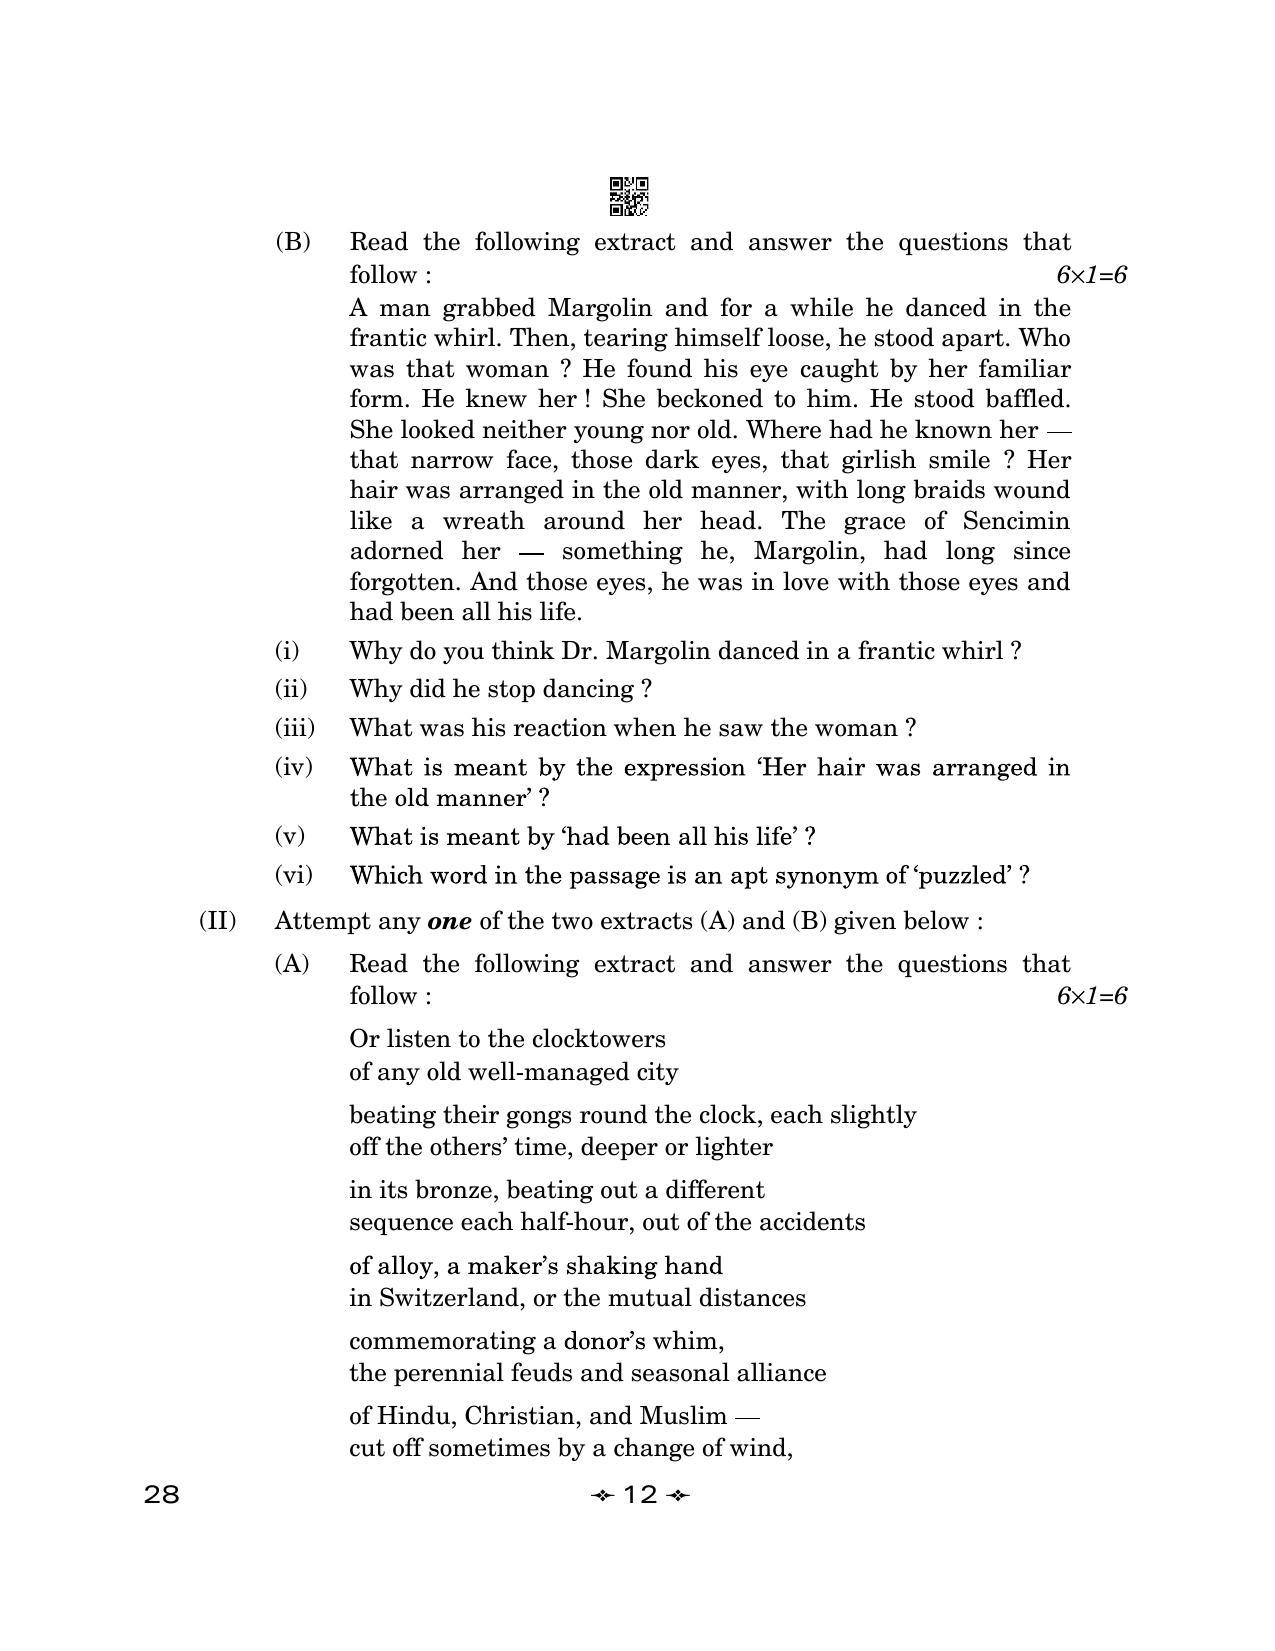 CBSE Class 12 28_English Elective 2023 Question Paper - Page 12